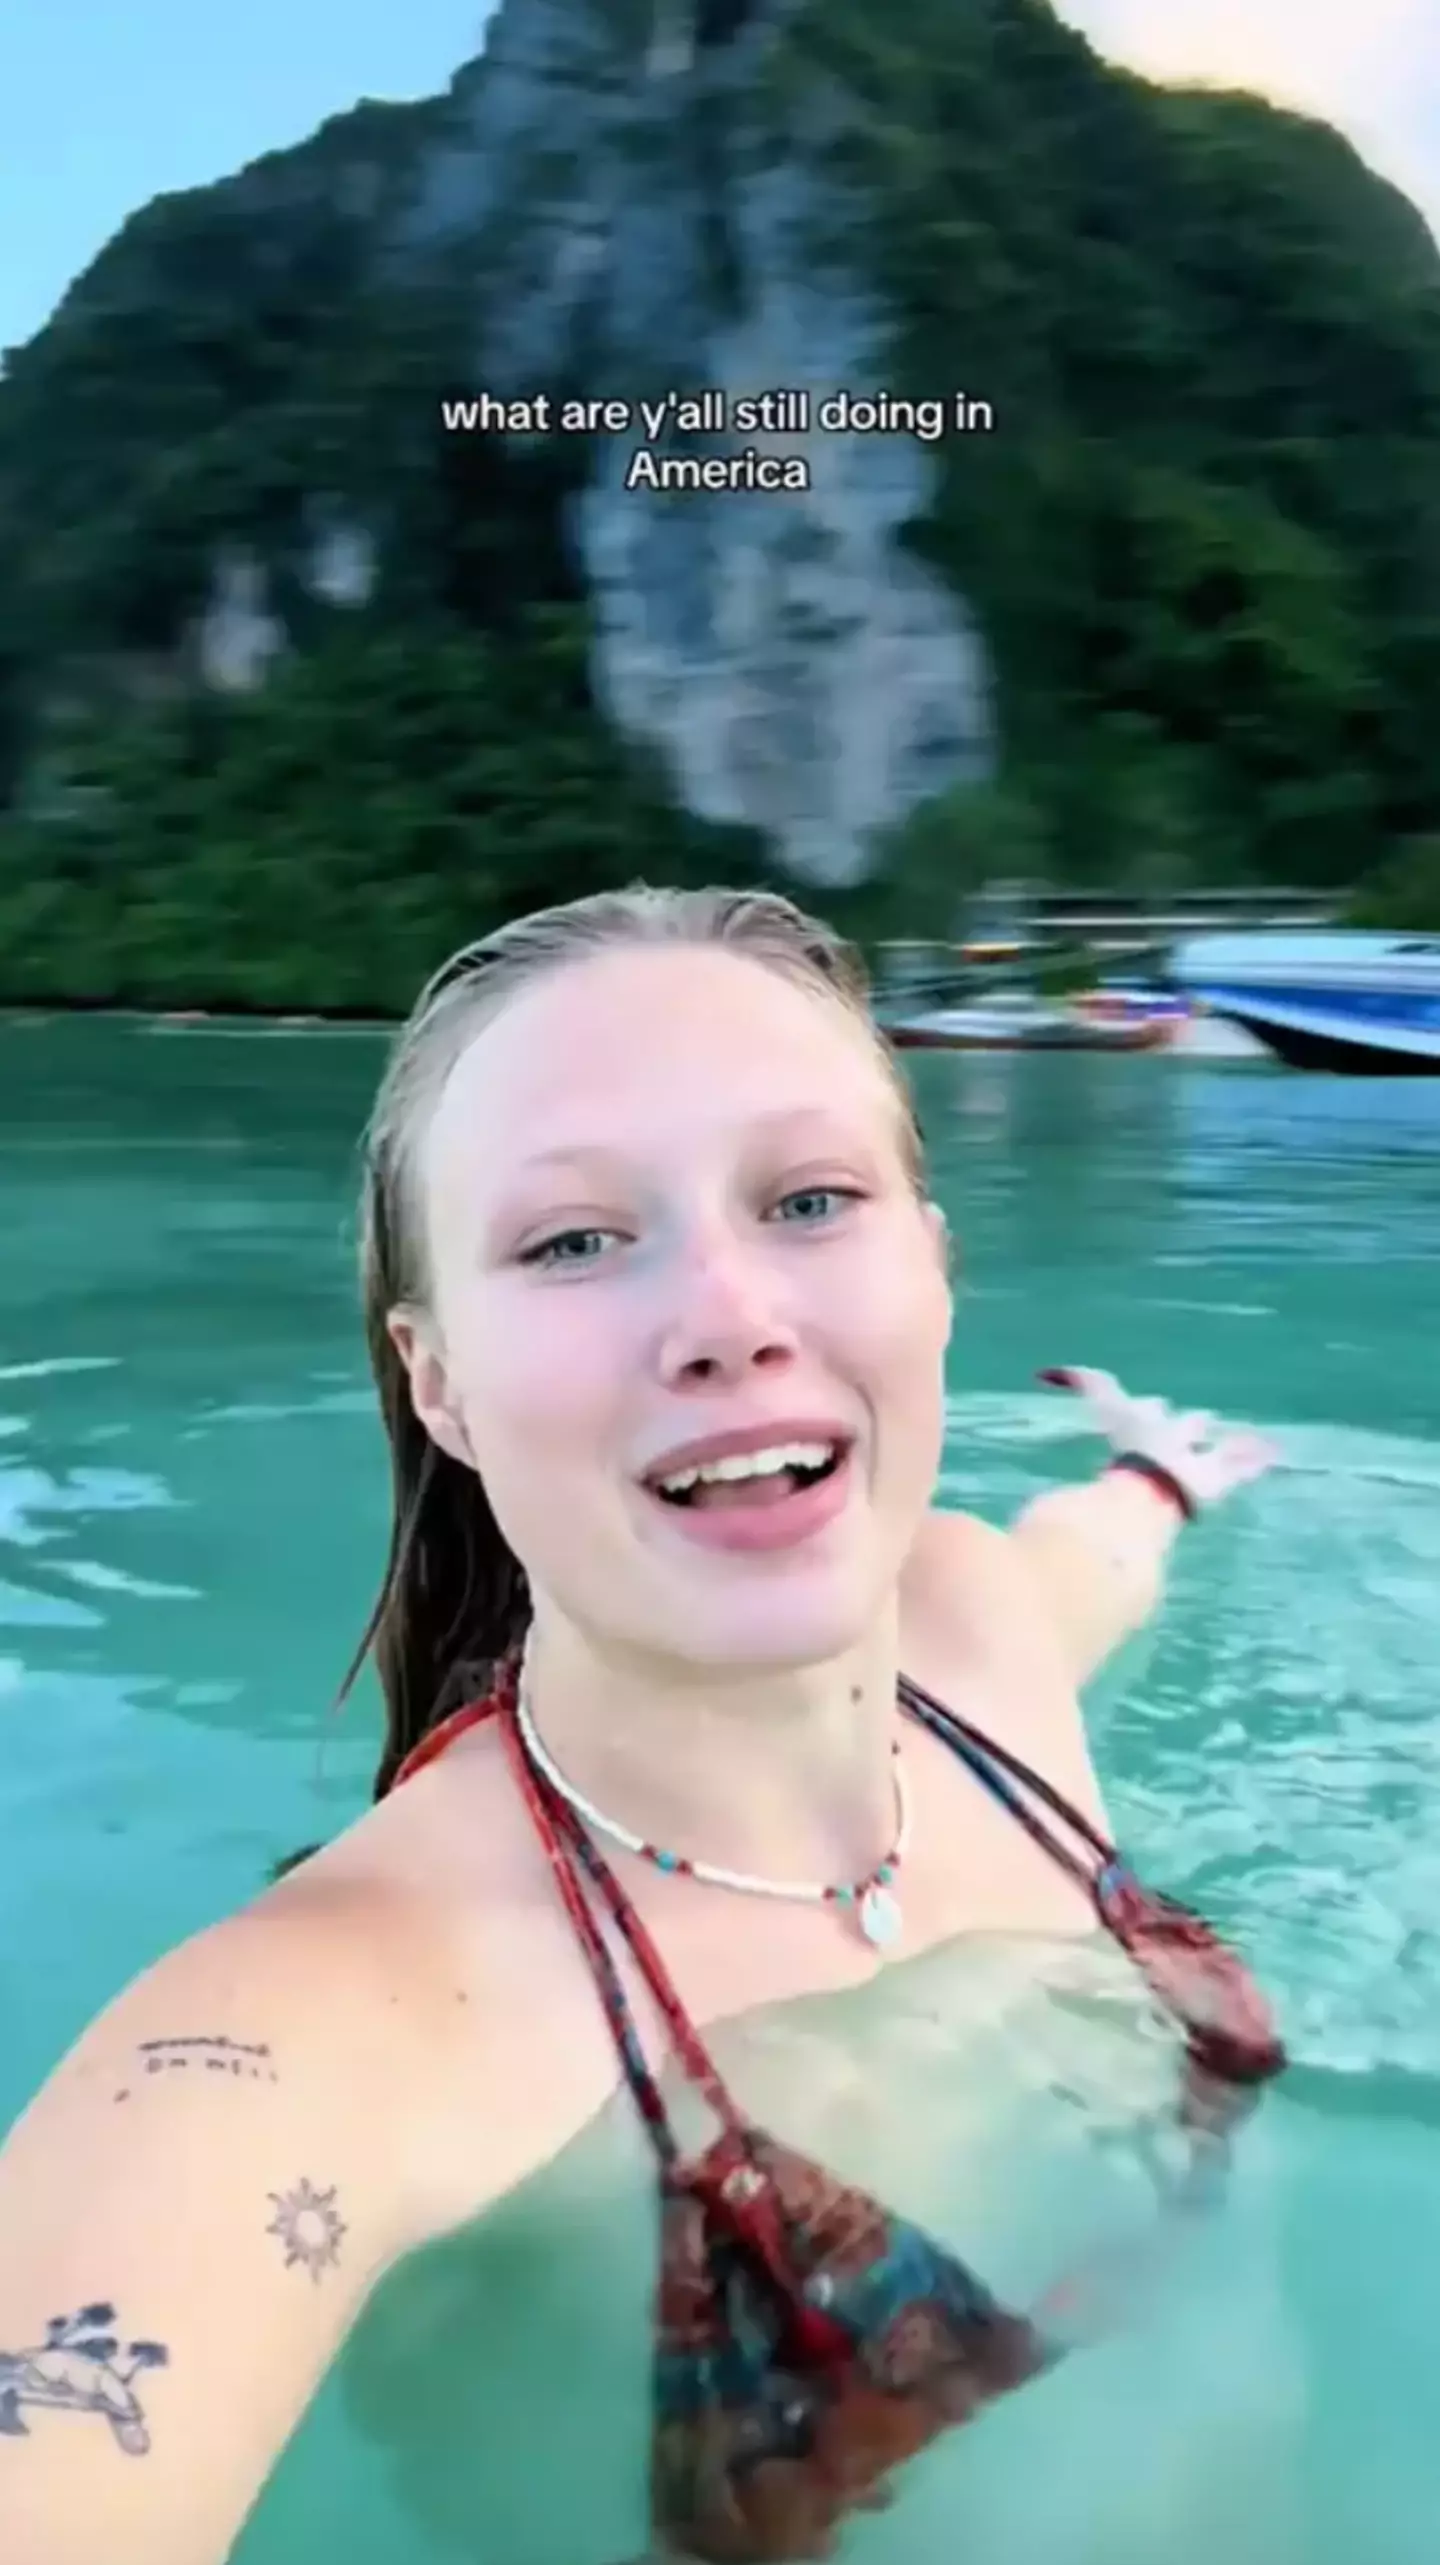 Kat Crittenden posted the video from Thailand.